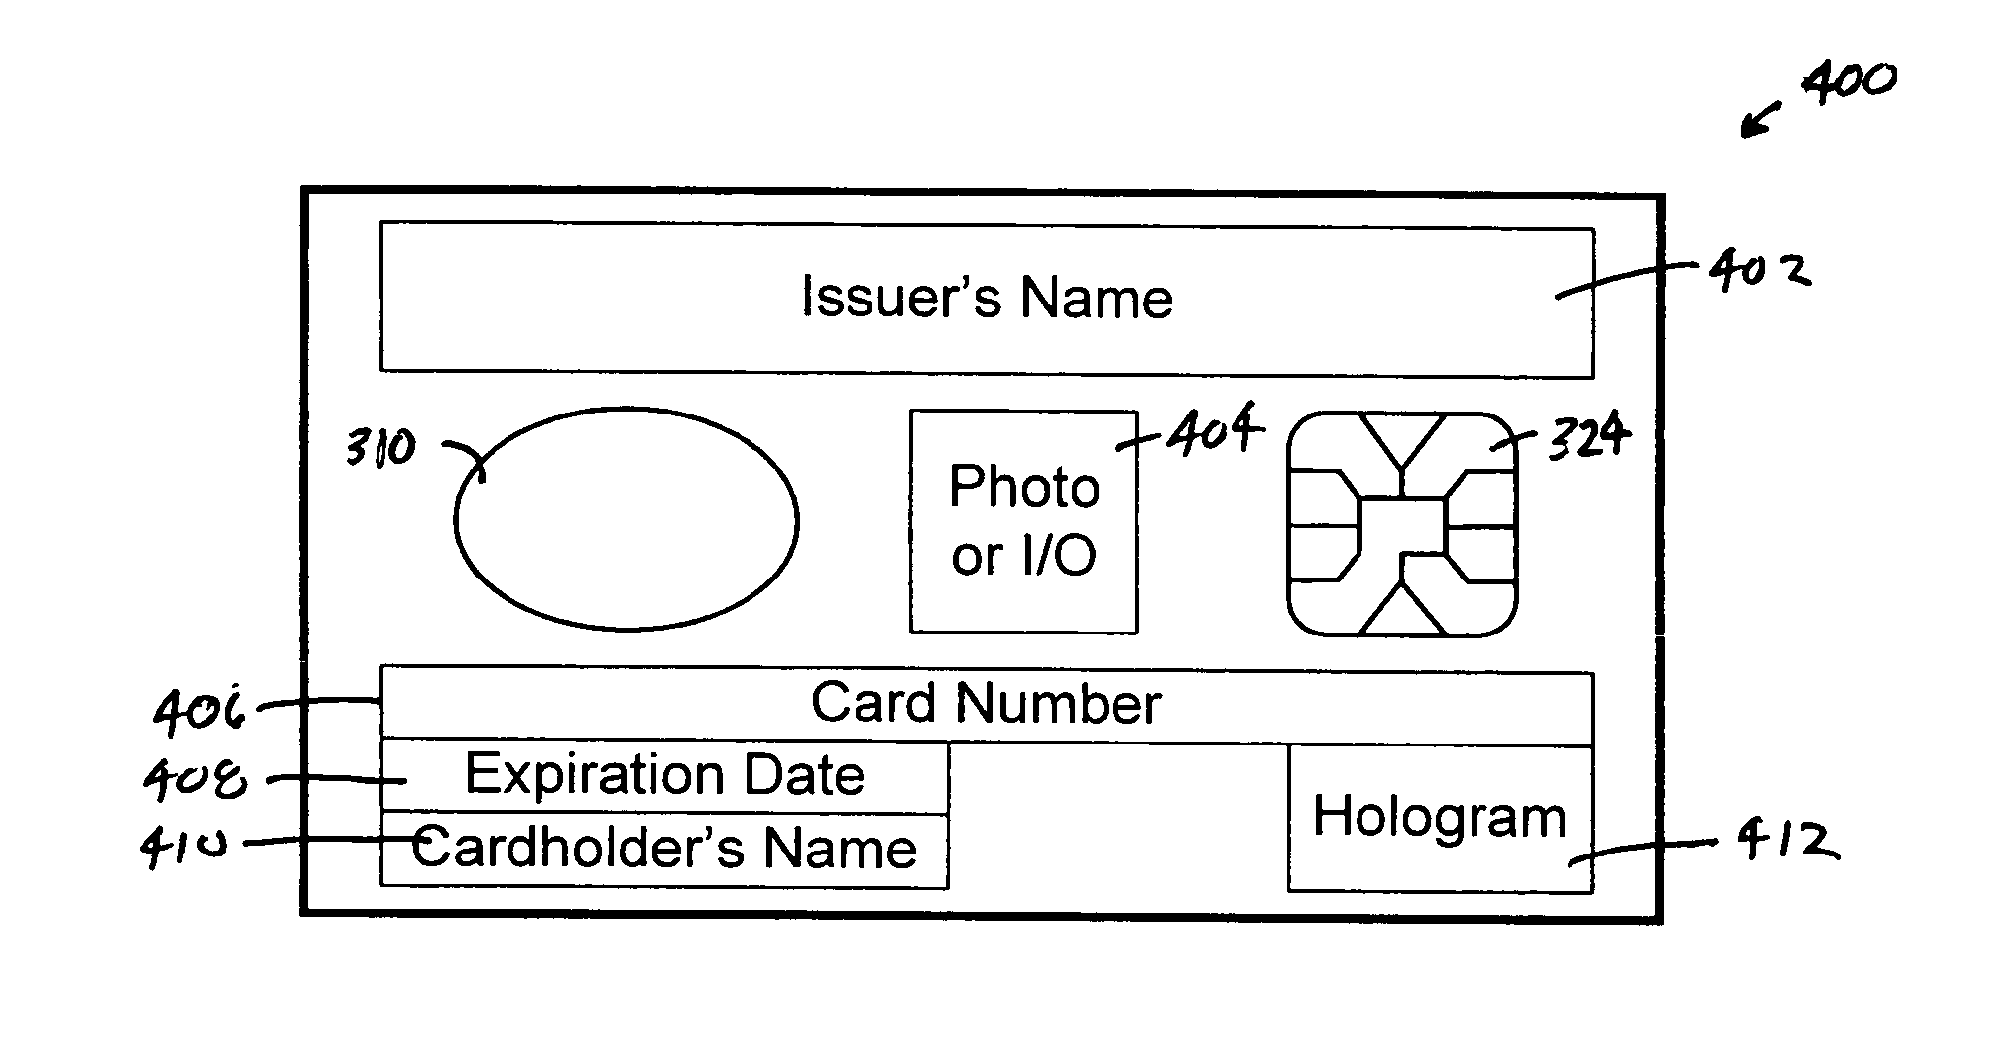 System, Method and Apparatus for Enabling Transactions Using a Biometrically Enabled Programmable Magnetic Stripe